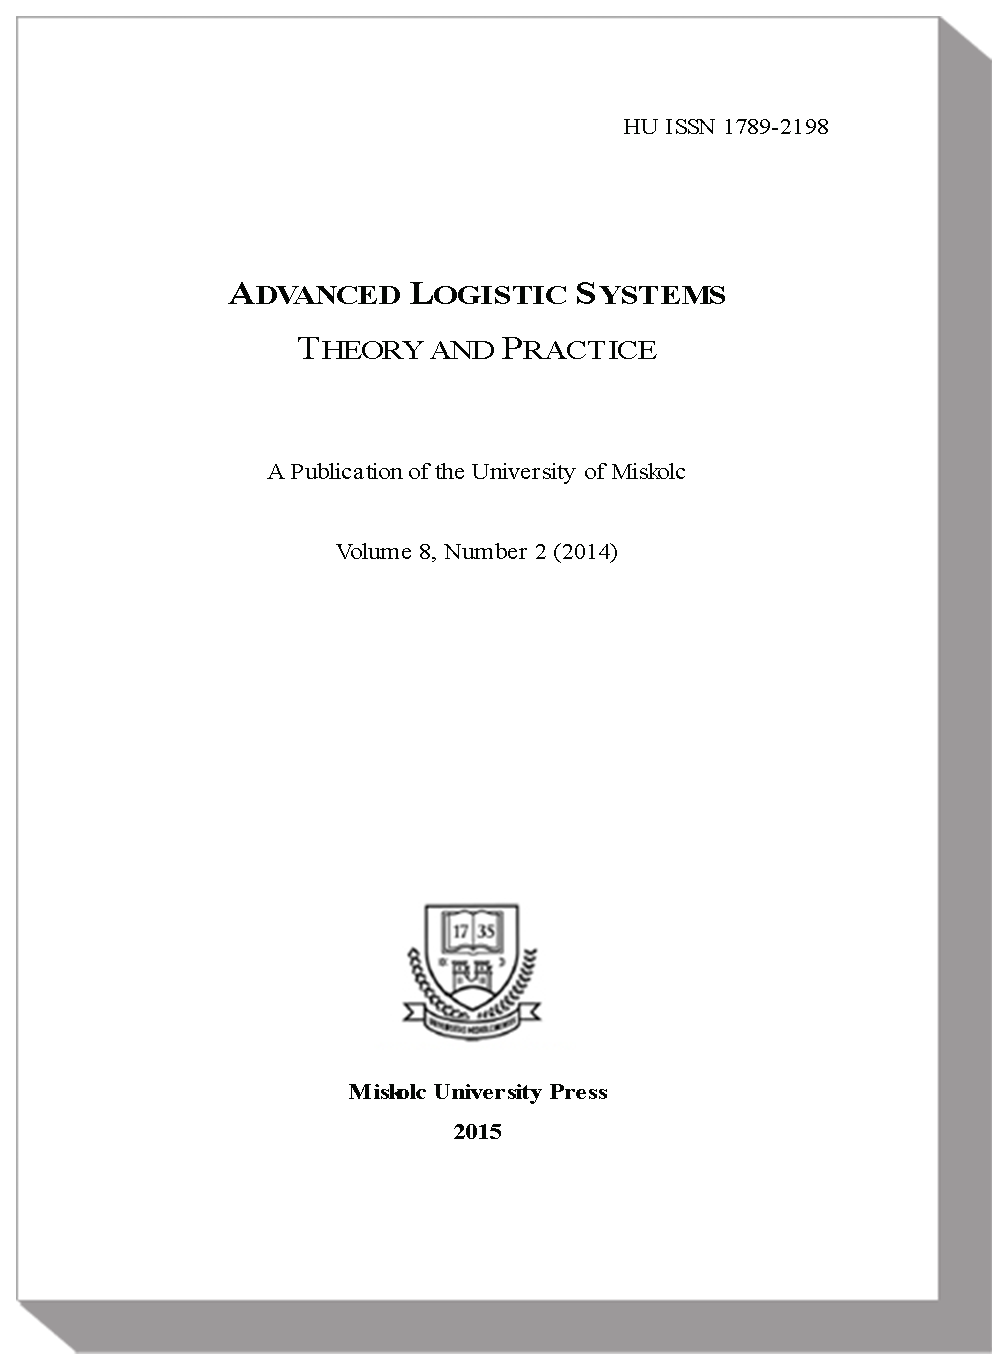 					View Vol. 8 No. 2 (2014): Advanced Logistic Systems - Theory and Practice
				